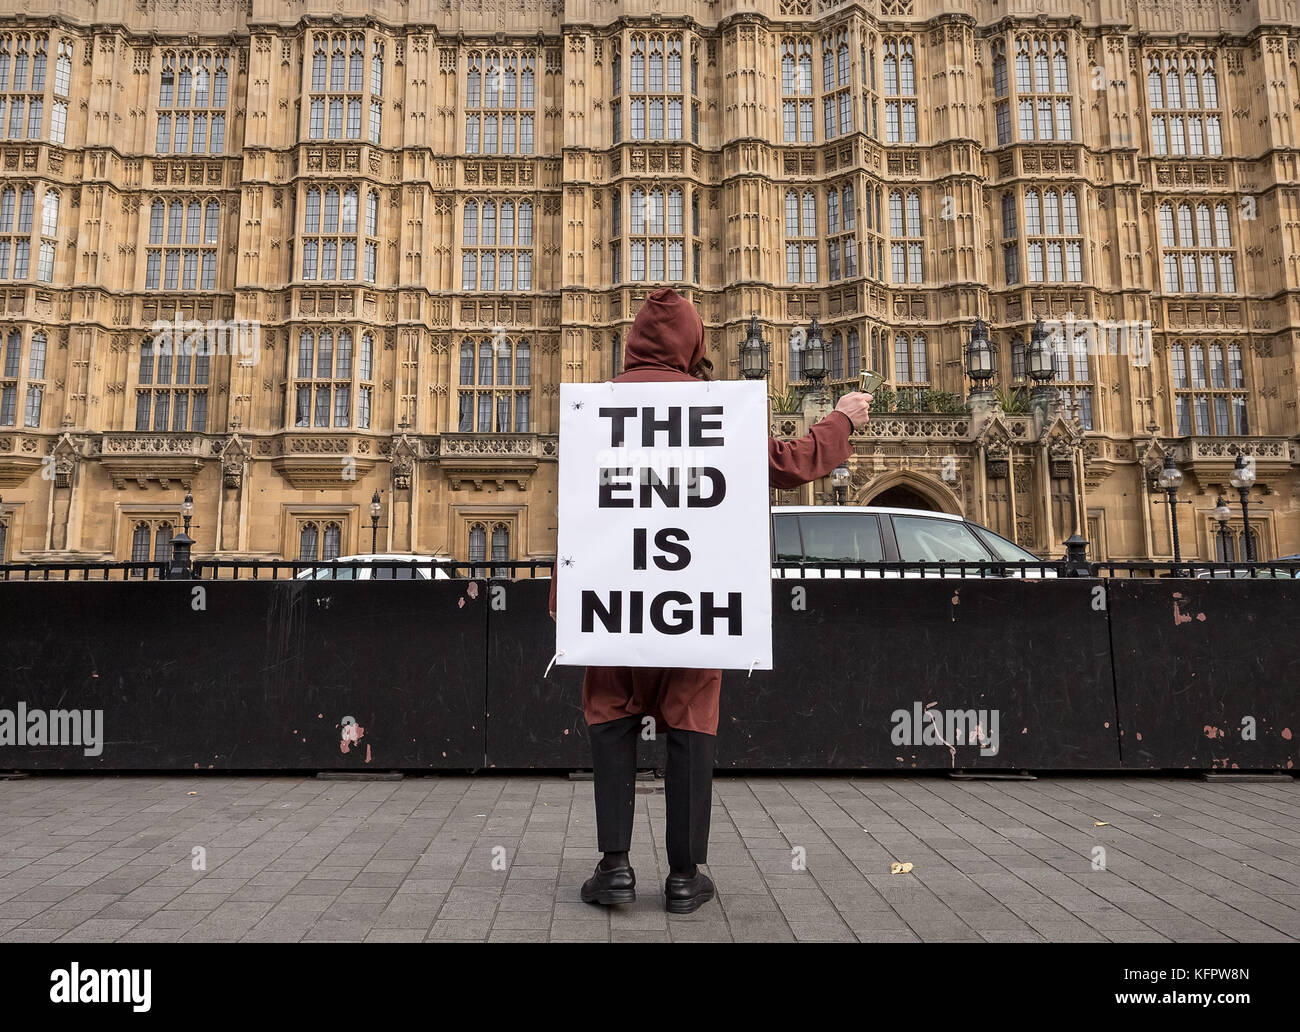 london-uk-31st-oct-2017-the-end-is-nigh-apocalyptic-sign-is-seen-near-KFPW8N.jpg